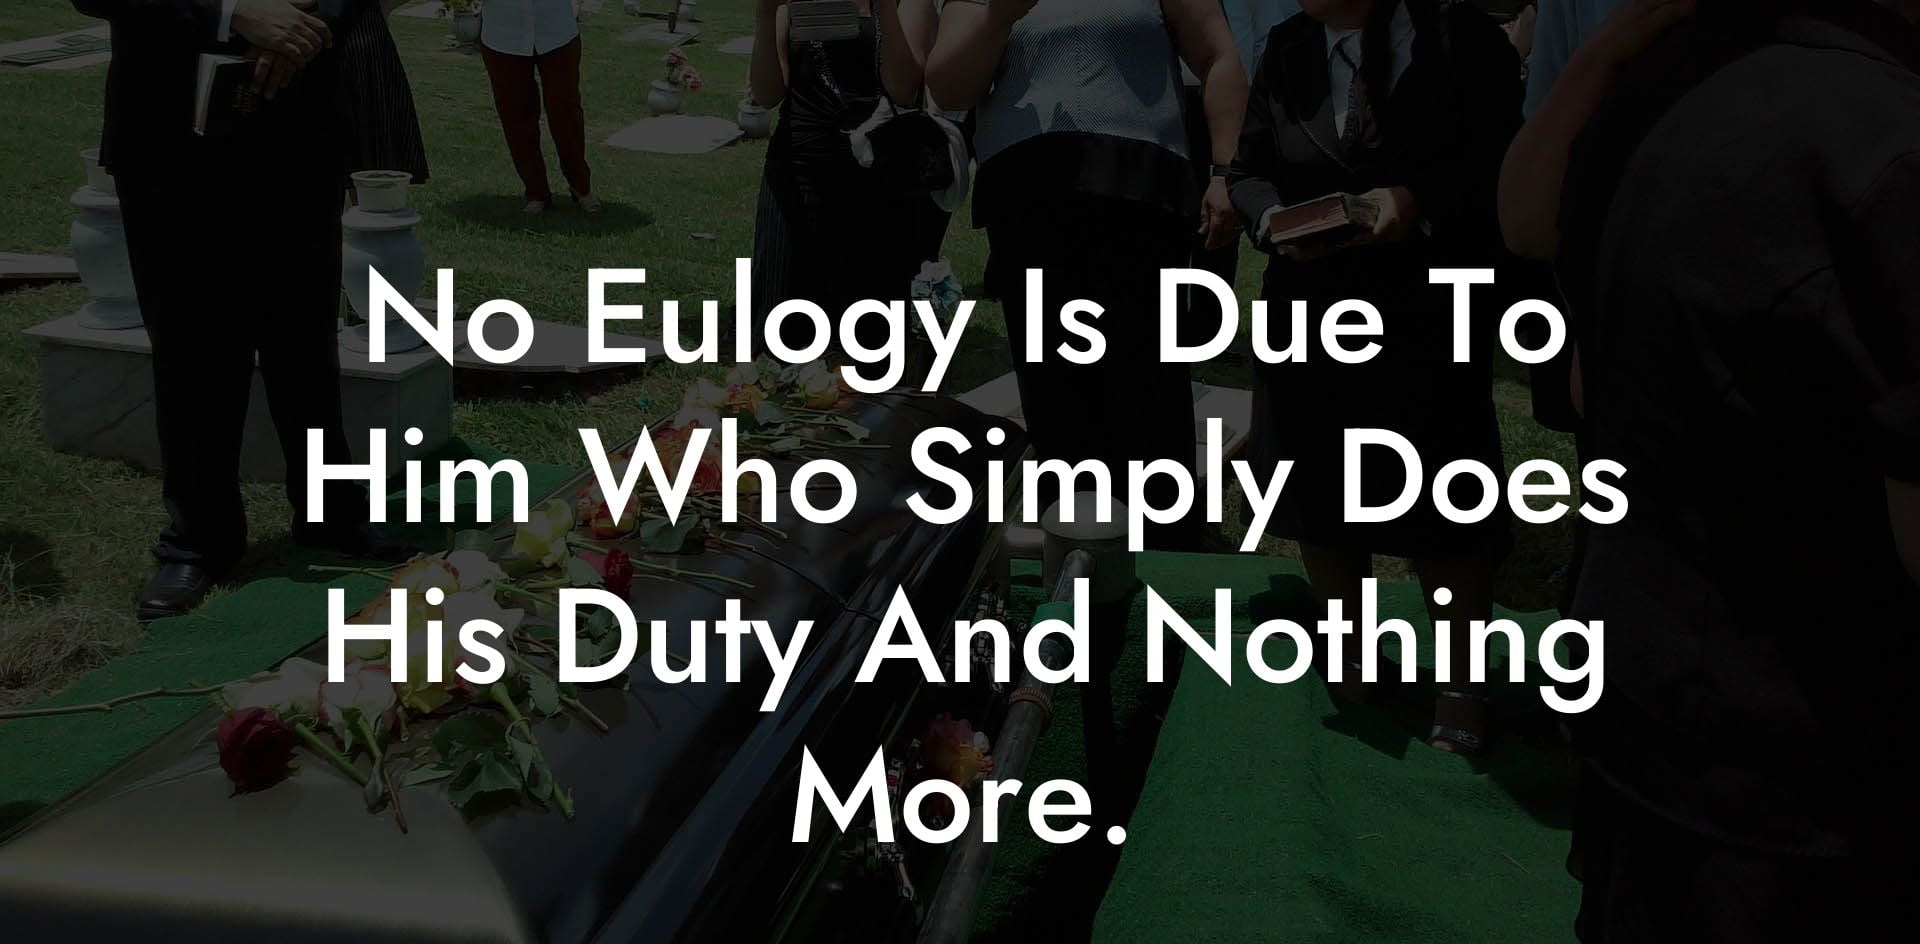 No Eulogy Is Due To Him Who Simply Does His Duty And Nothing More.